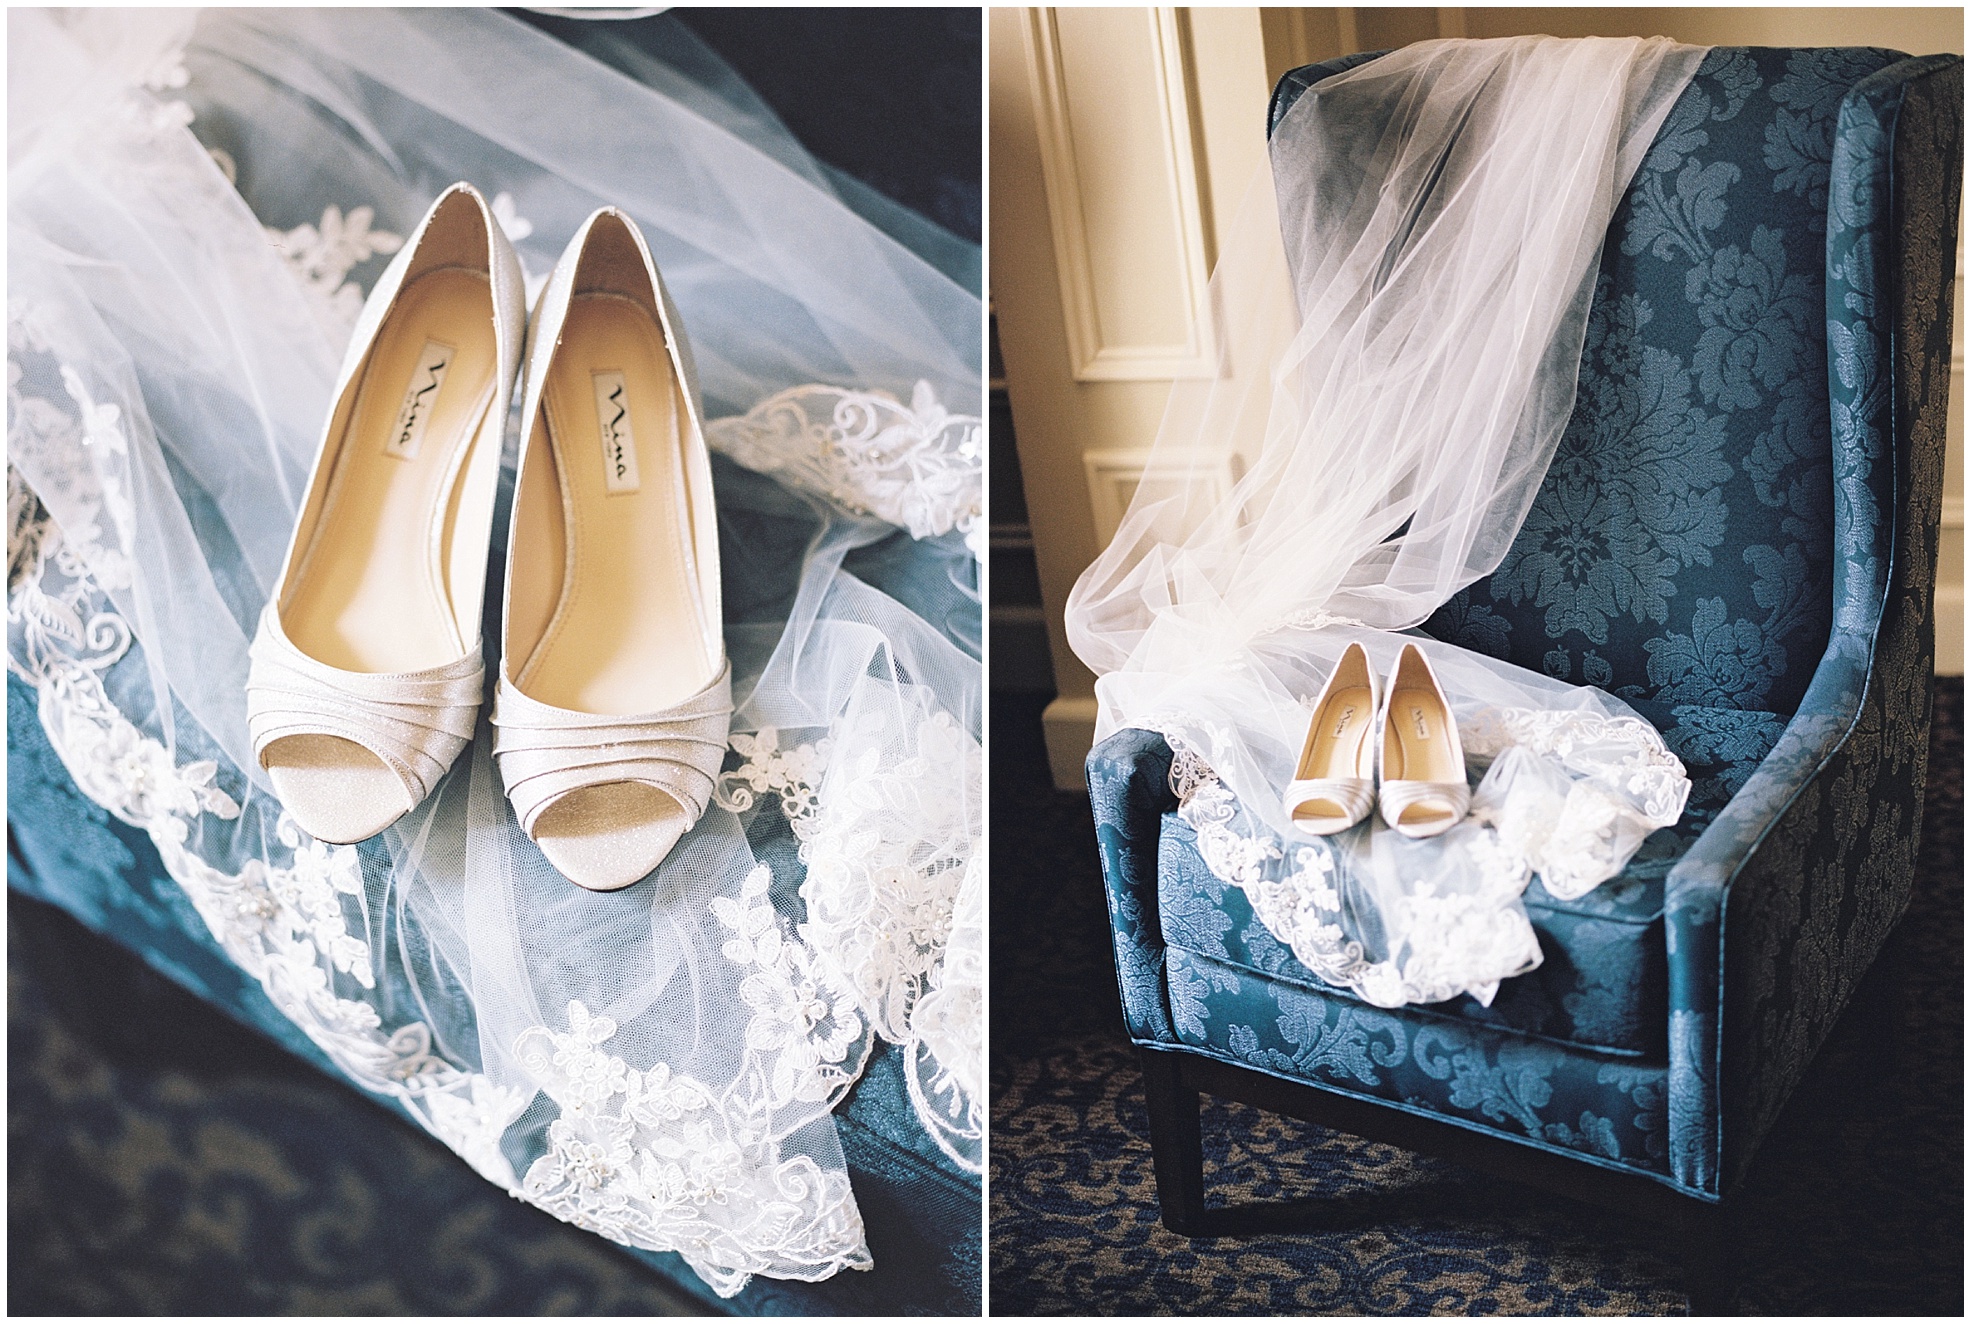 Olivia & Will || Wedding in Birmingham Alabama || Cathedral of St. Paul || Film Previews 